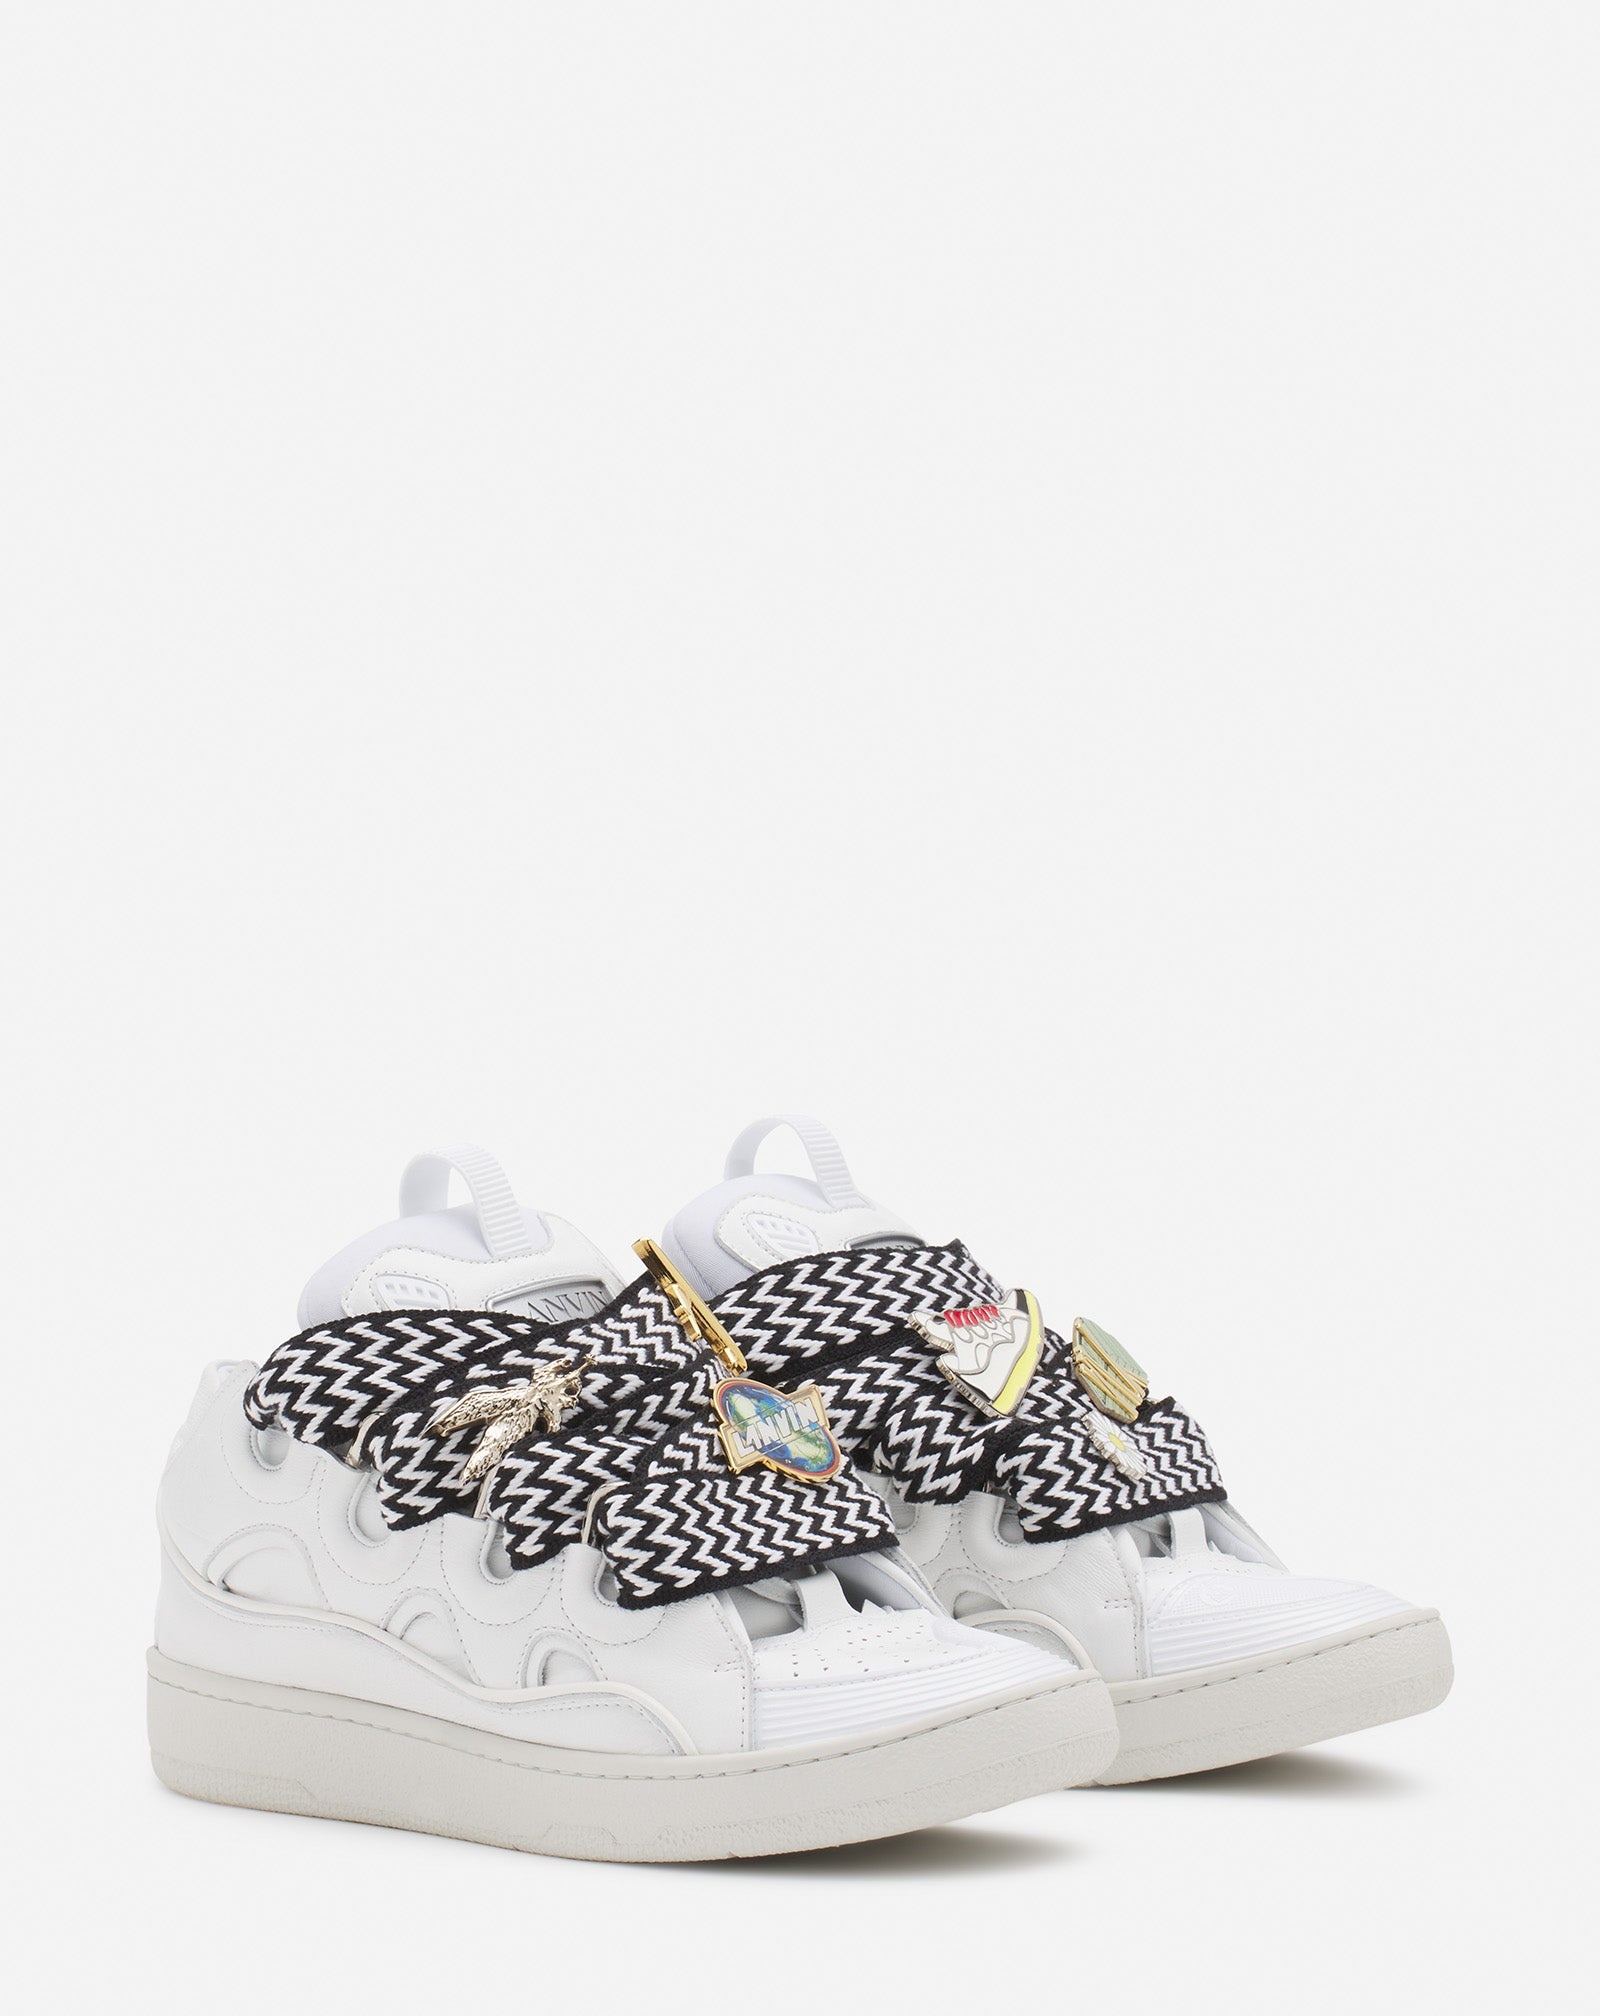 LANVIN X FUTURE CURB 3.0 LEATHER SNEAKERS FOR WOMEN - 2